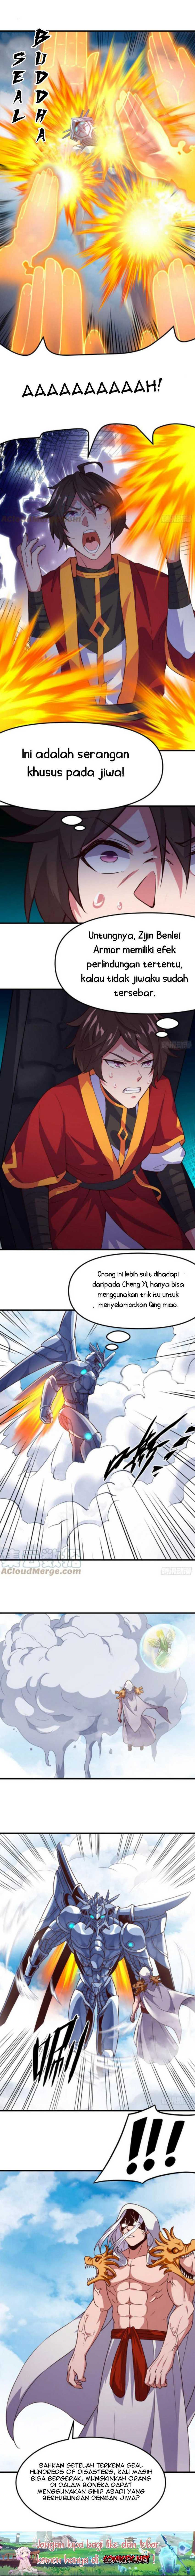 My Harem Depend on Drawing Cards Chapter 152 bahasa inodnesia